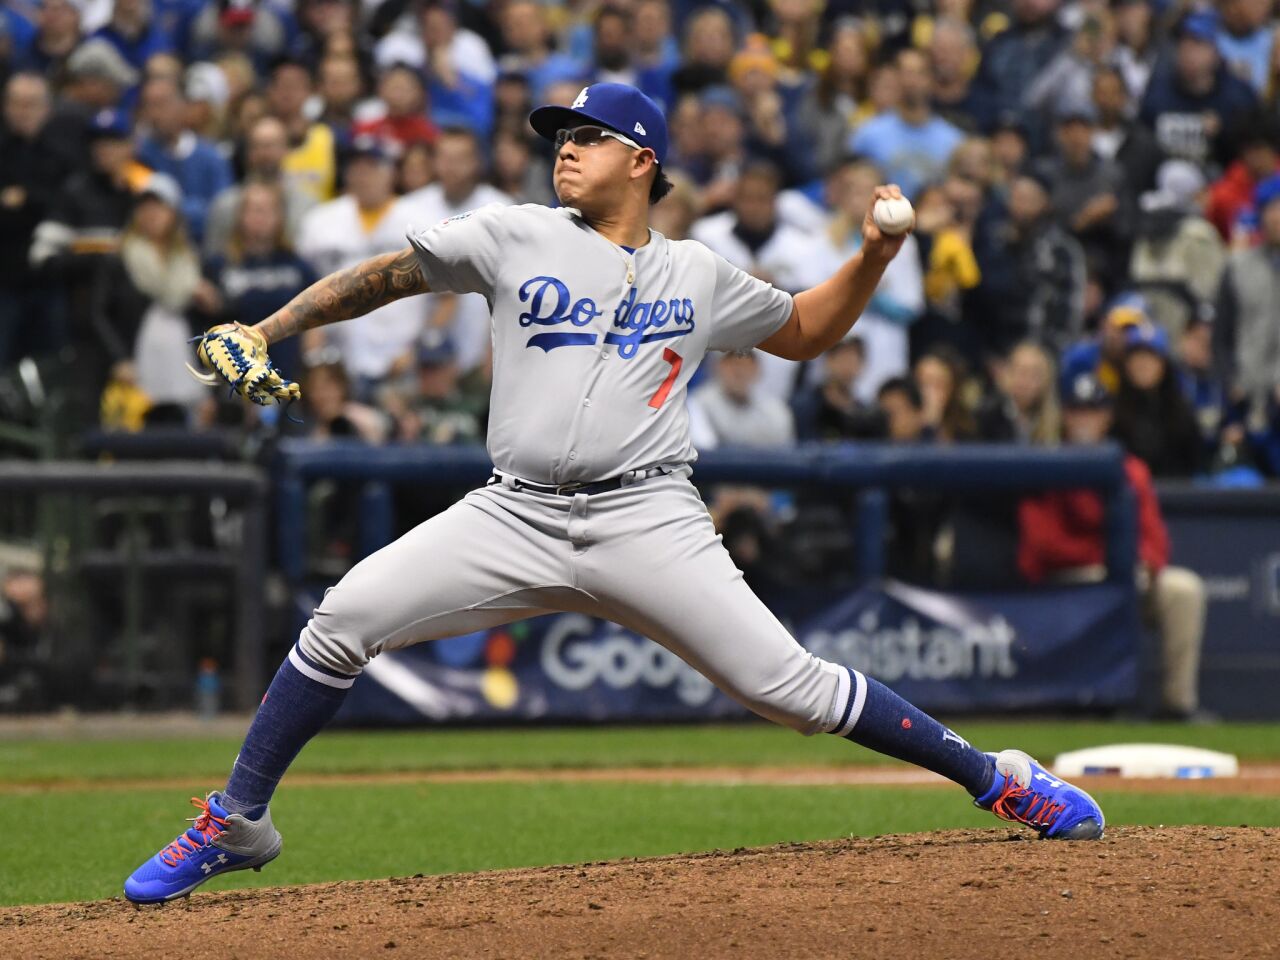 Dodgers relief pitcher Juan Urias throws in the fifth inning.